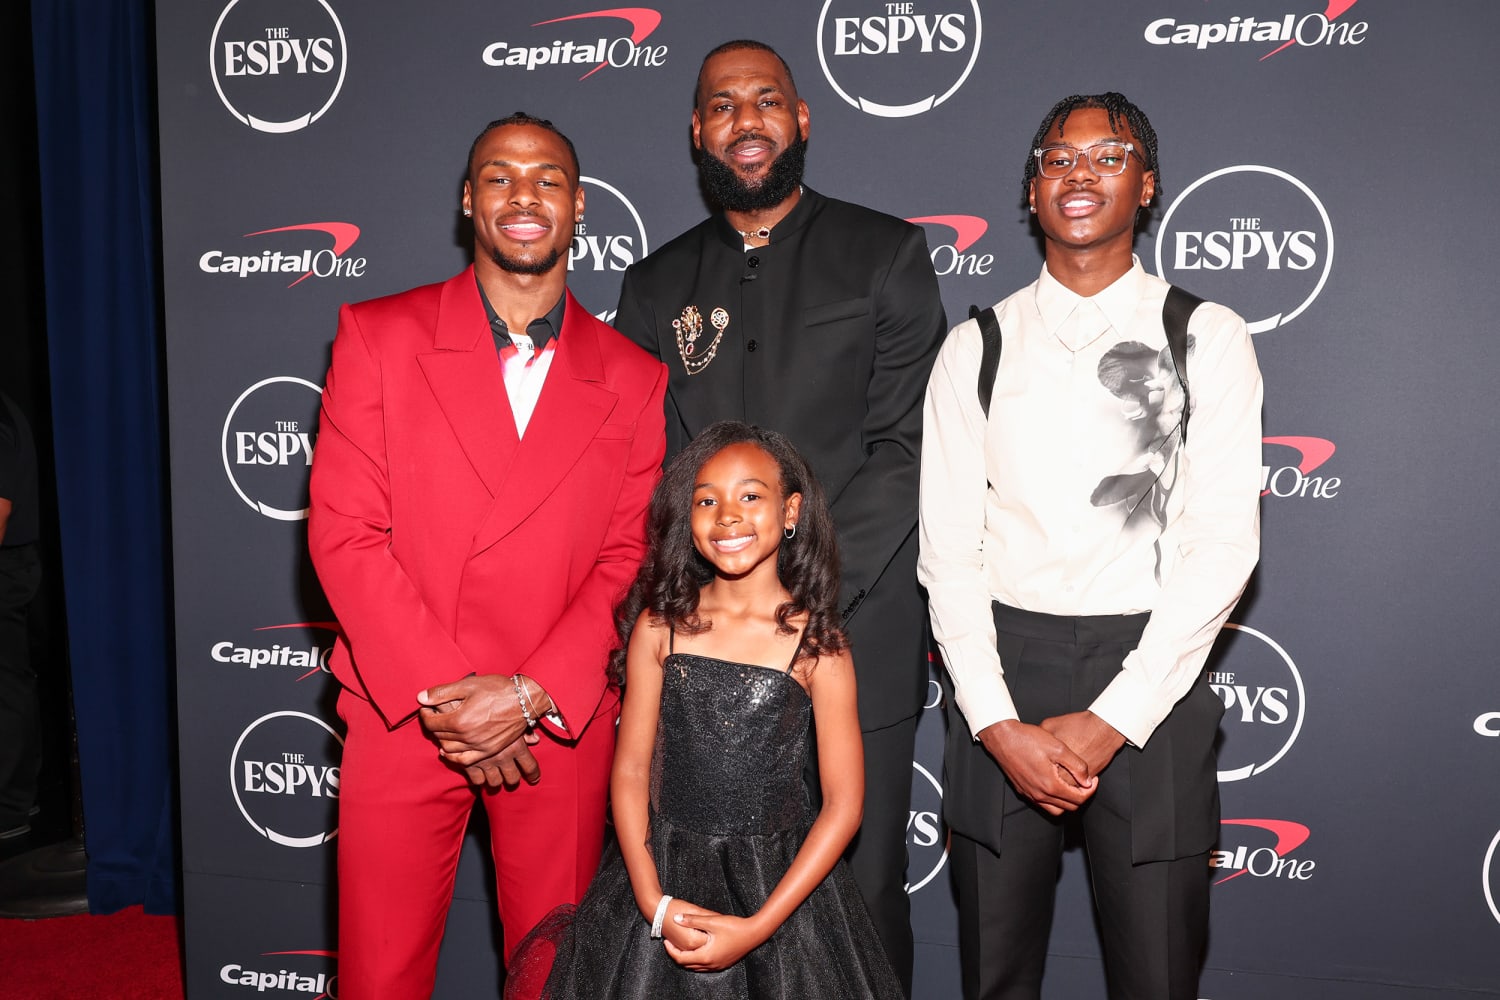 Bronny James, LeBron James' son, suffers cardiac arrest during USC  practice. Here's what we know so far. - CBS News